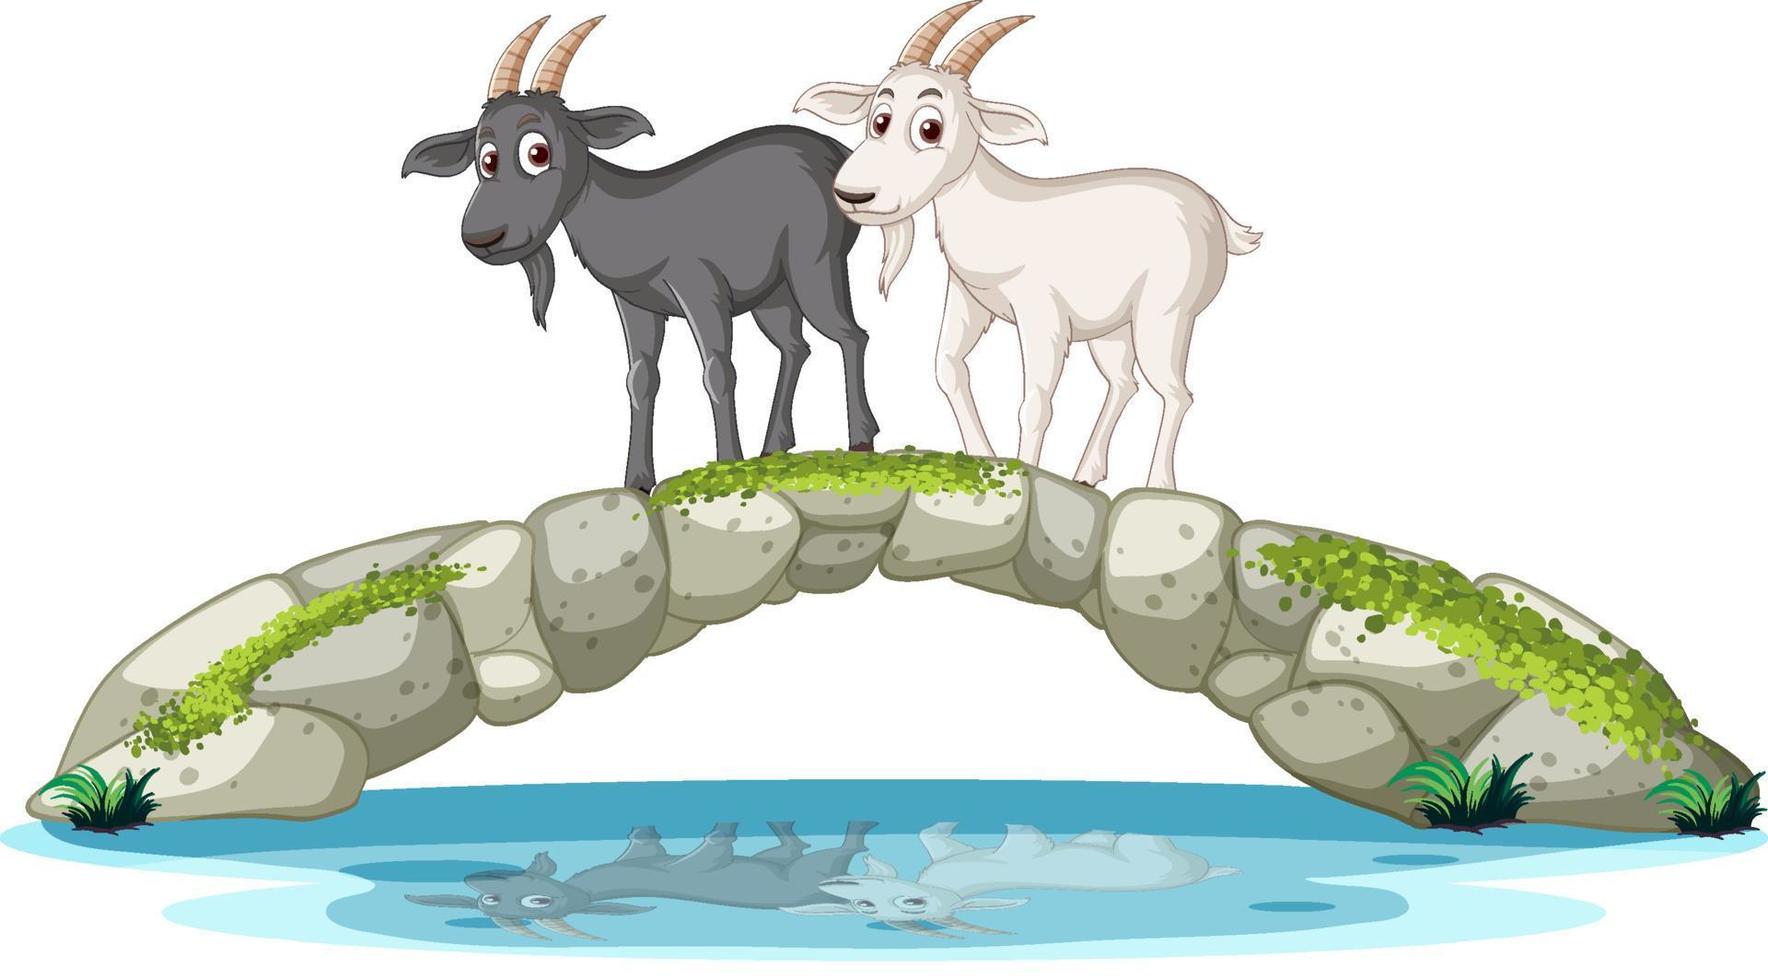 Black and white goats standing on stone bridge vector